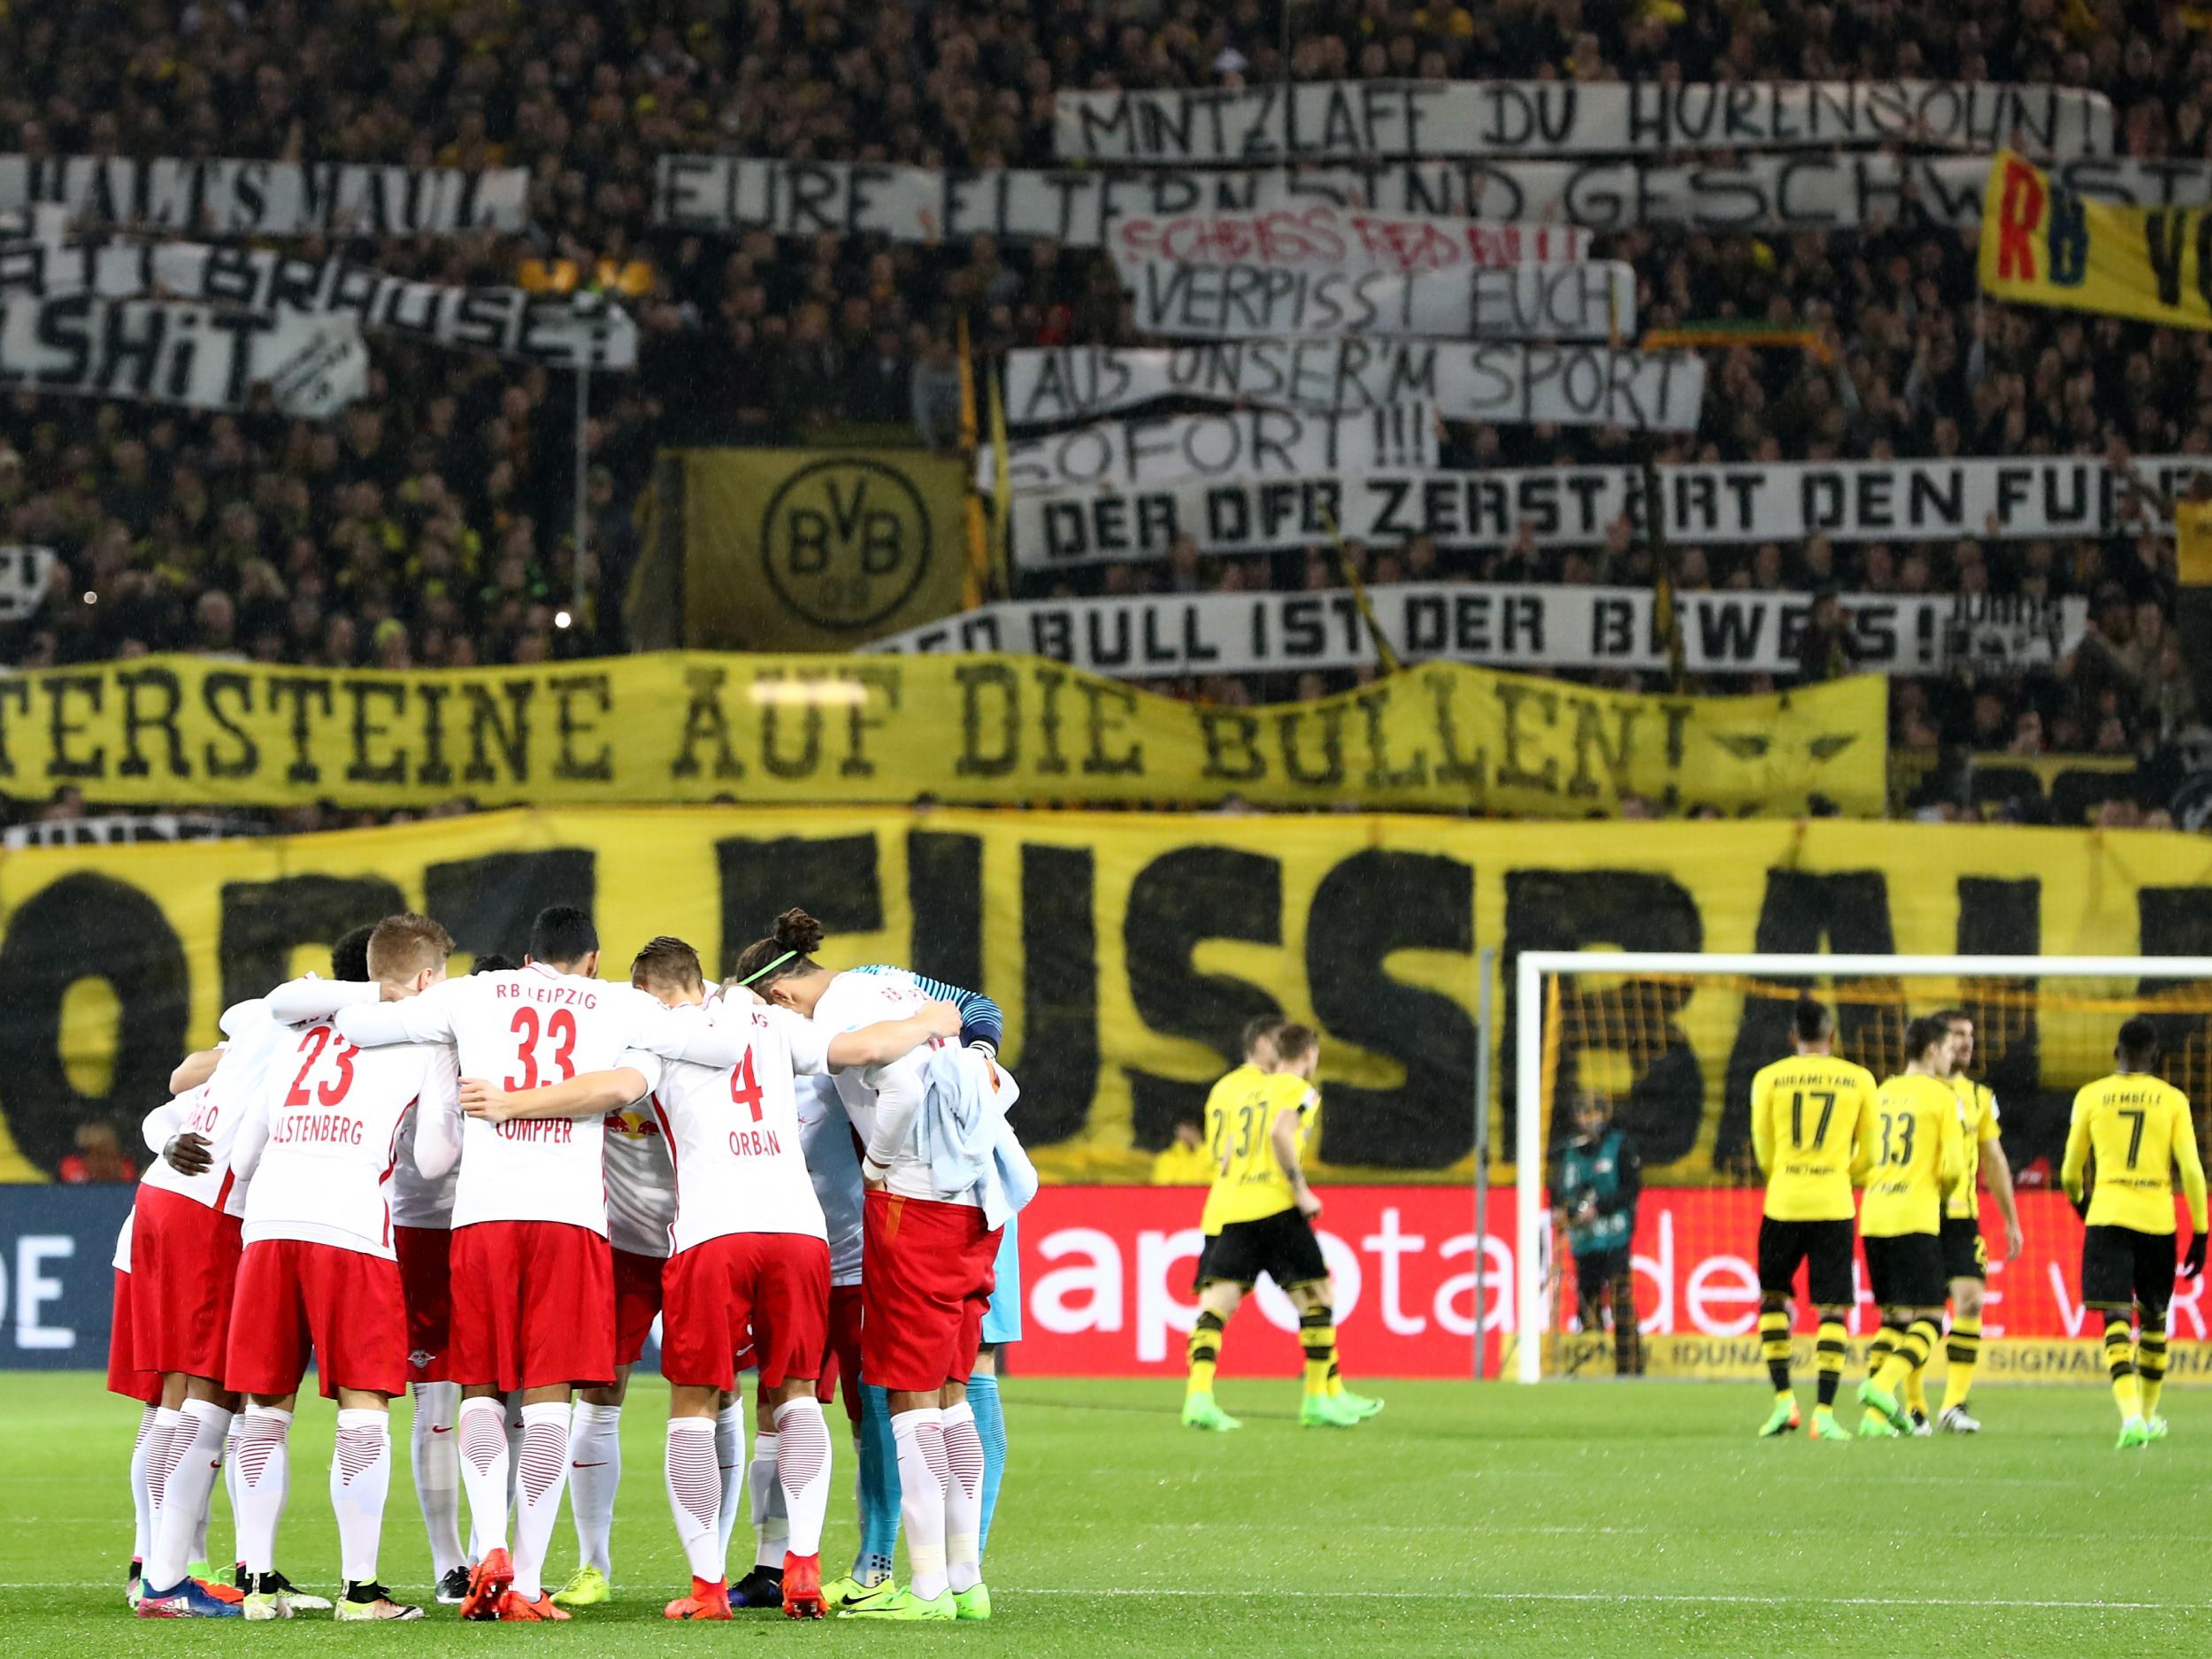 Could Dortmund be overthrown as Germany’s second best team?